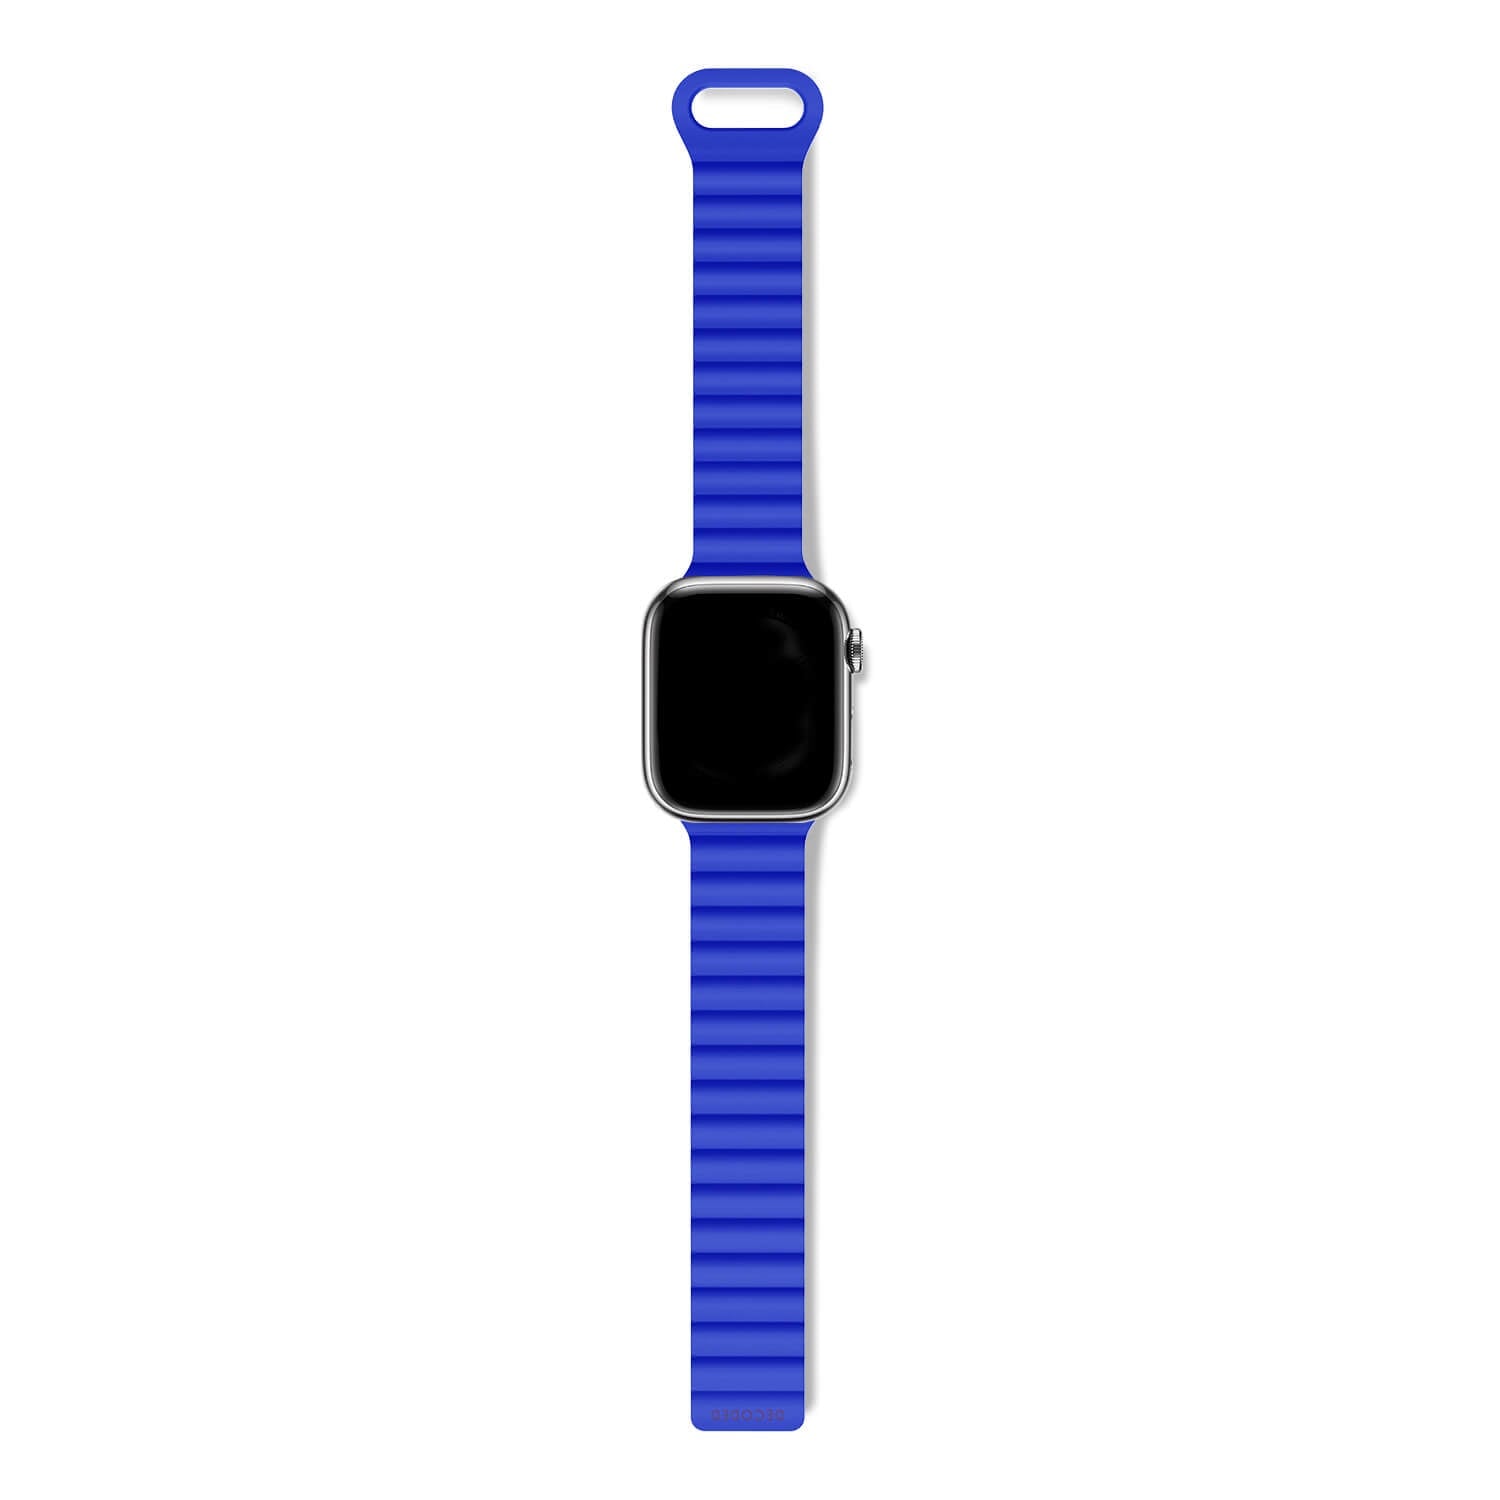 Silicone Traction Loop Strap Apple Watch 42mm, Galactic Blue